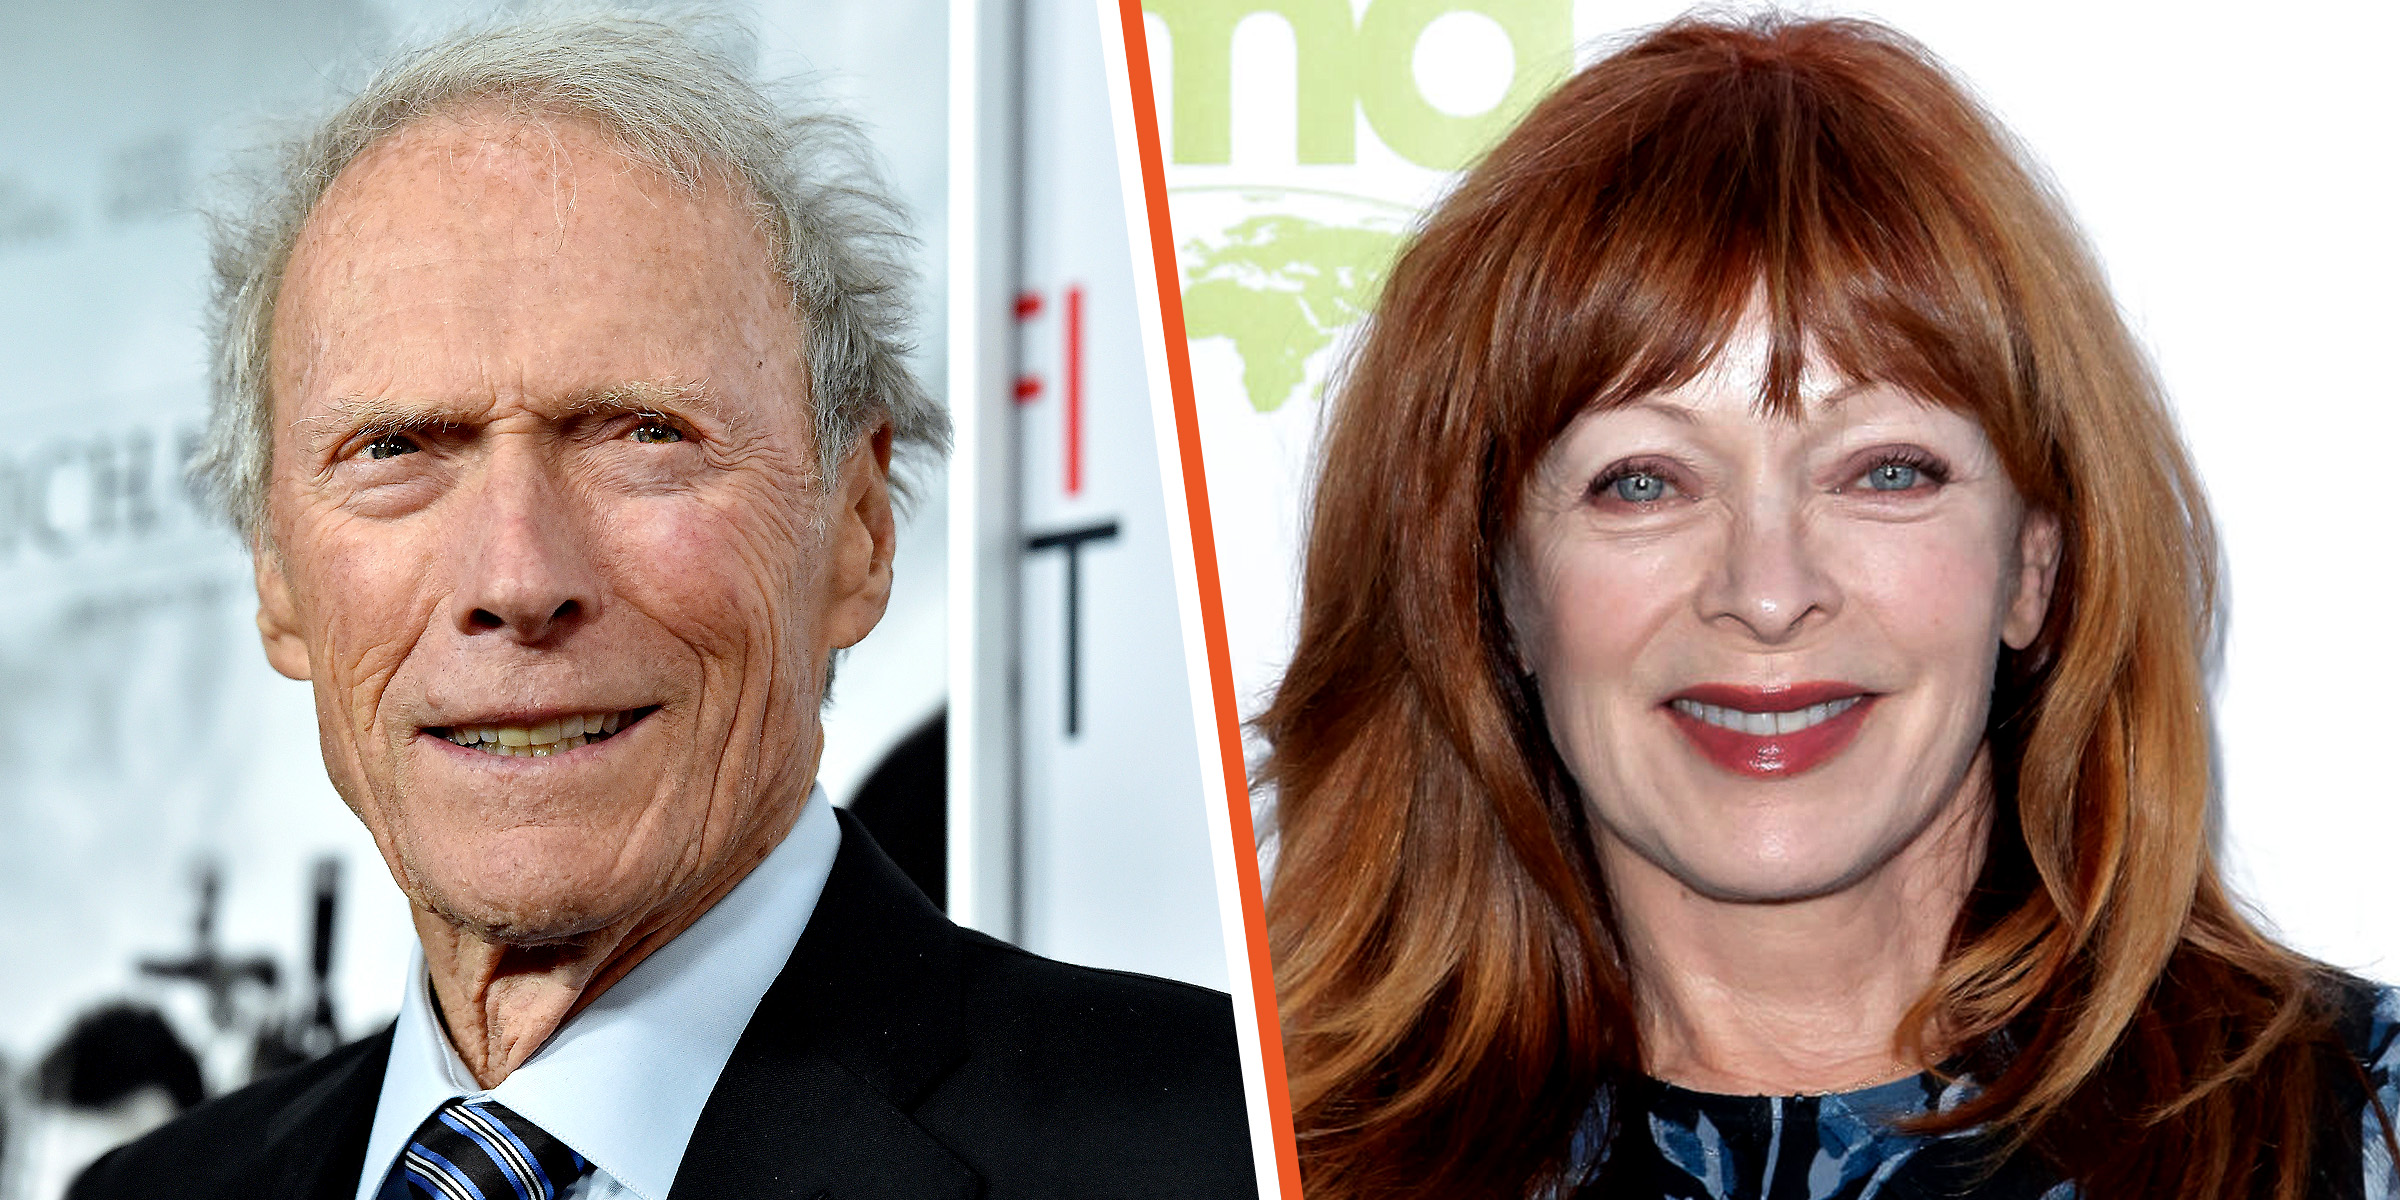 Clint Eastwood | Frances Fisher | Source: Getty Images